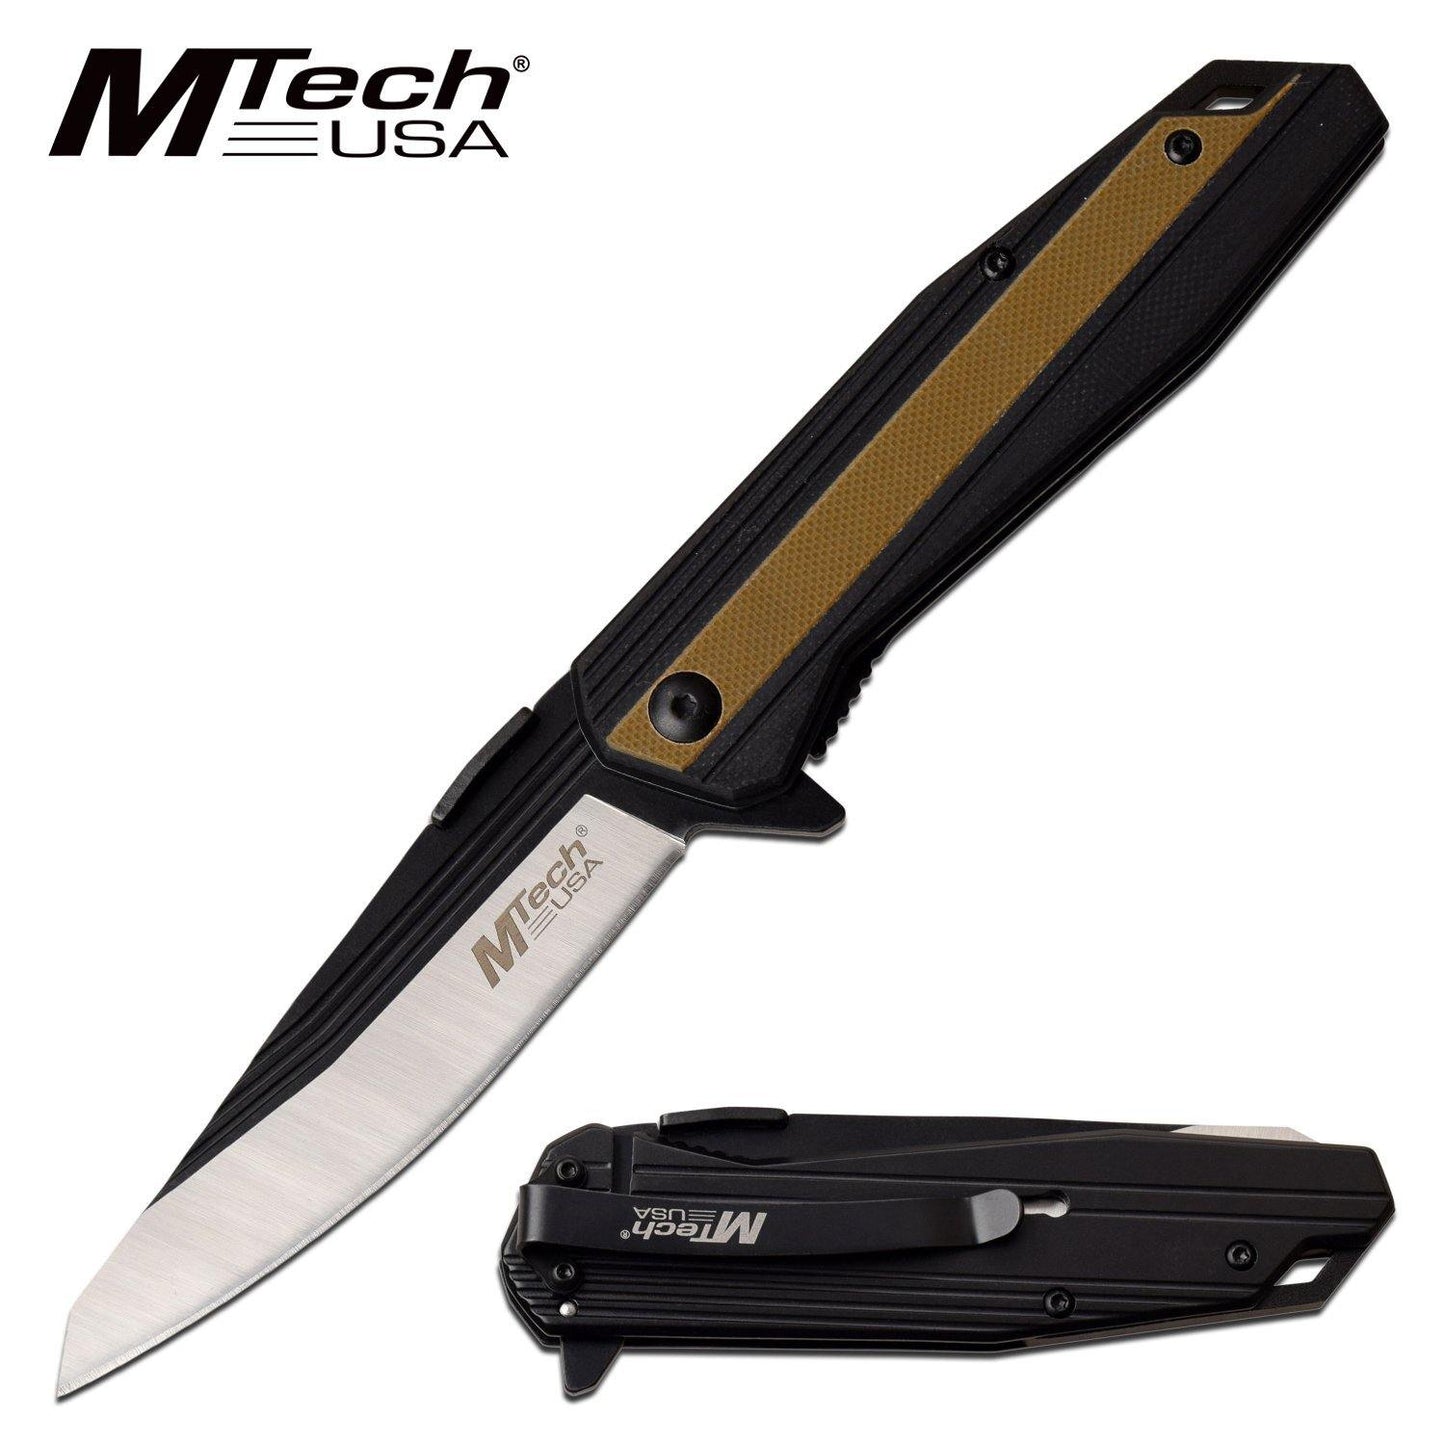 Mtech Drop Point Fine Edge Blade Folding Knife - 8 Inches Overall G10 Handle #mt-1081Tn - Xhunter New Zealand